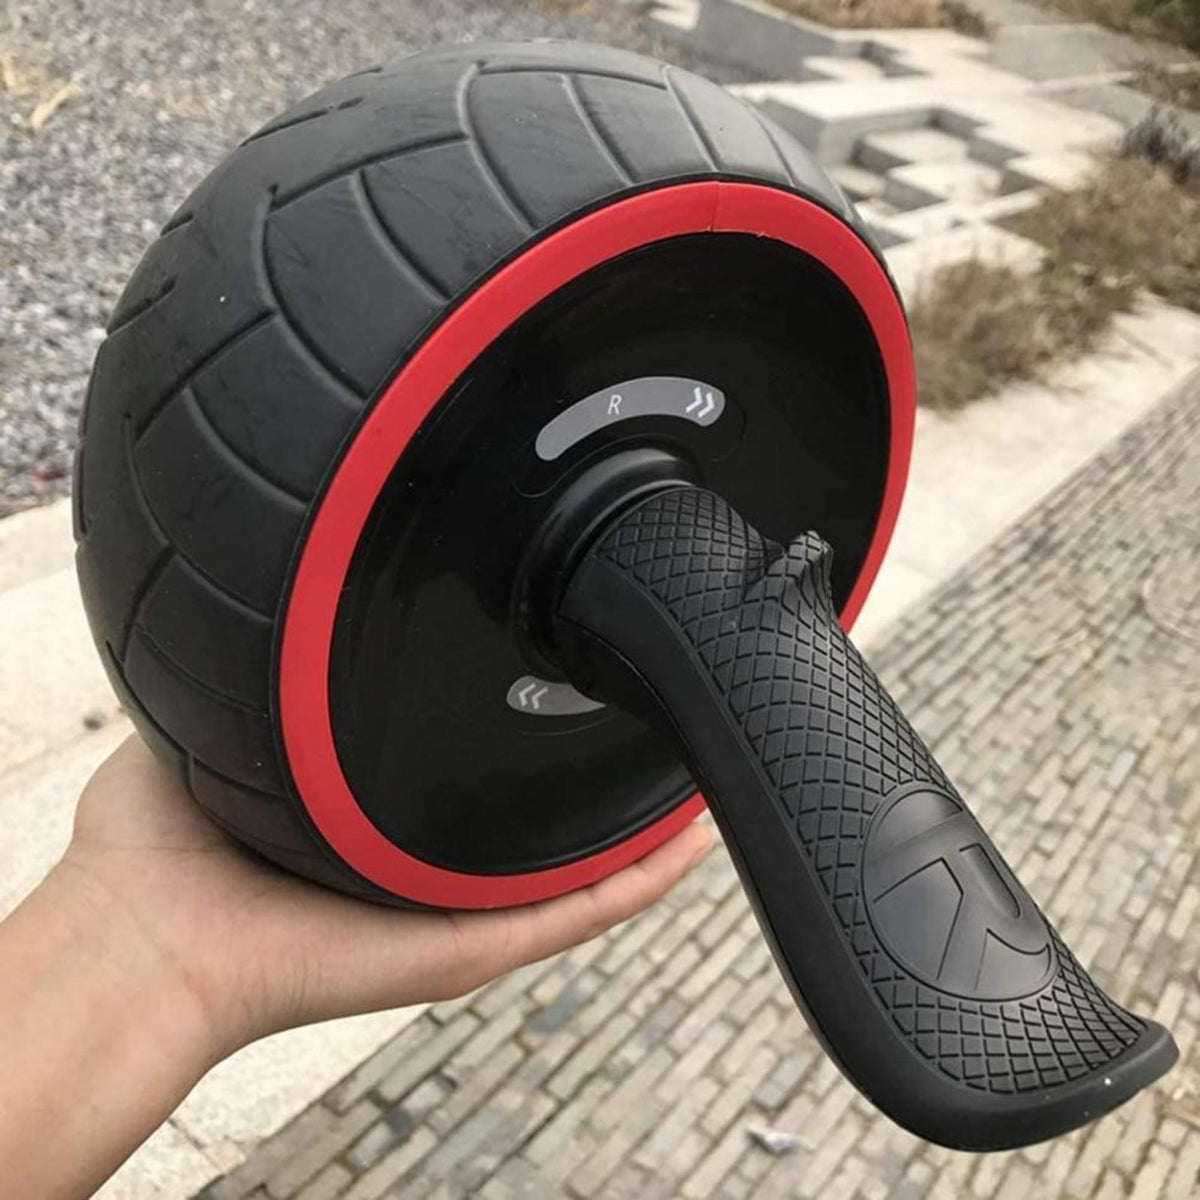 BlitzX Ab Roller Wheel for Abs Workout Ab Carver Abdominal Exercise Equipment Home GYM Body Shape Training Supplies